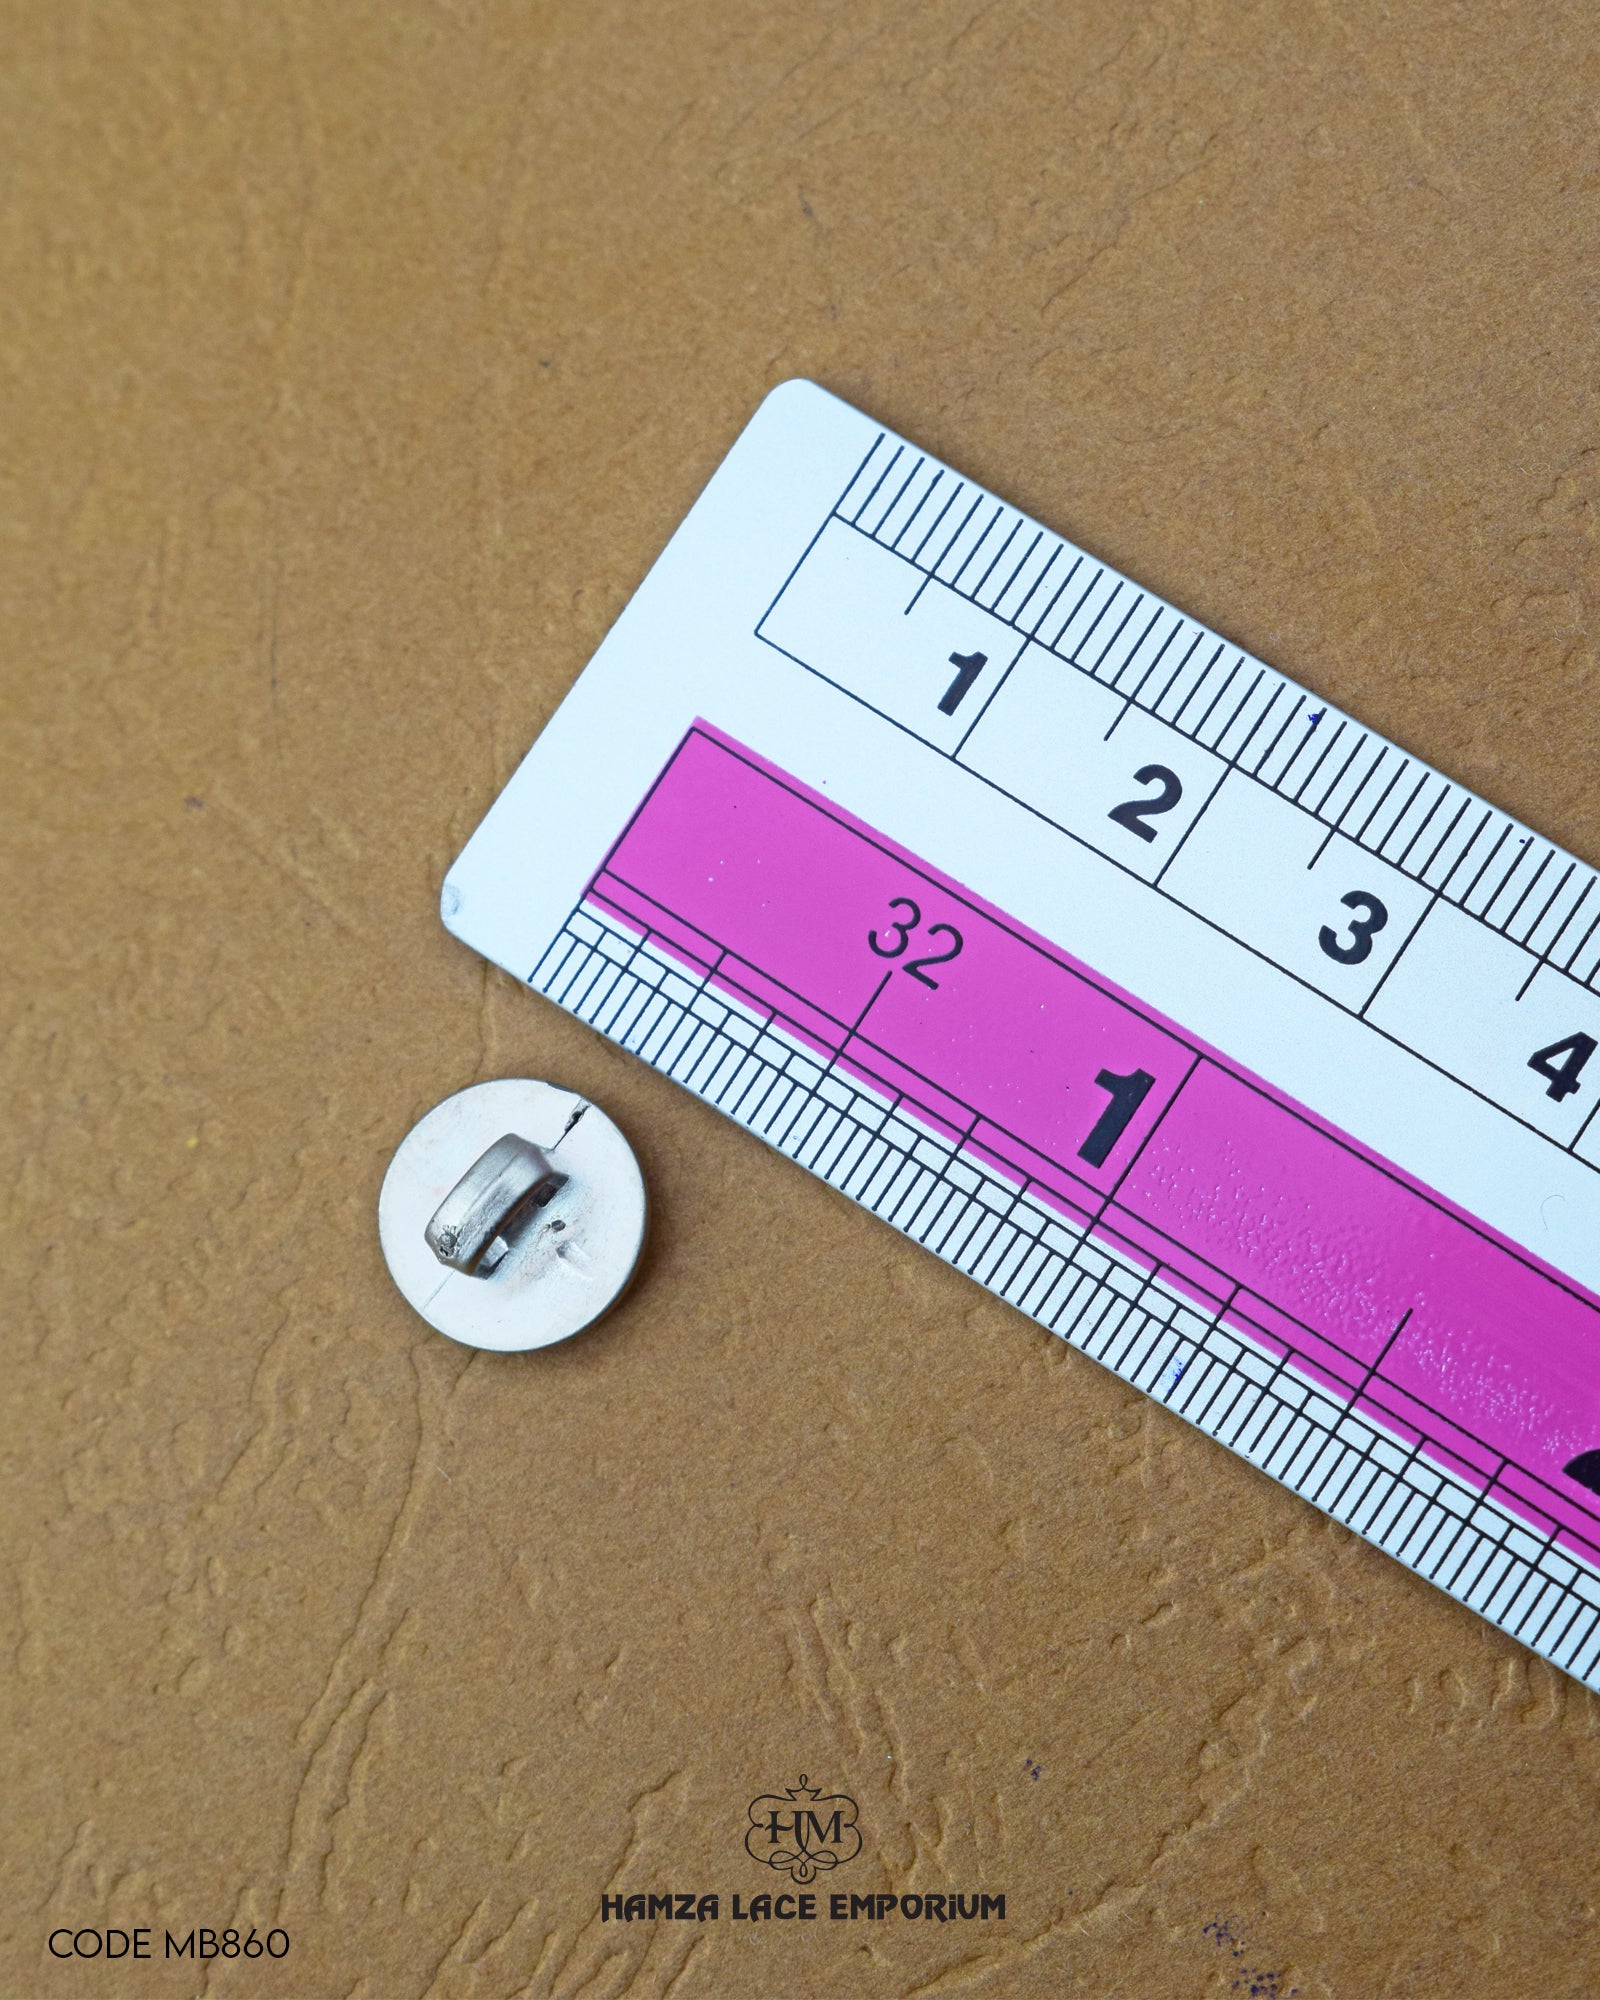 The dimensions of the 'Silver Metal Button MB860' are determined using a ruler.